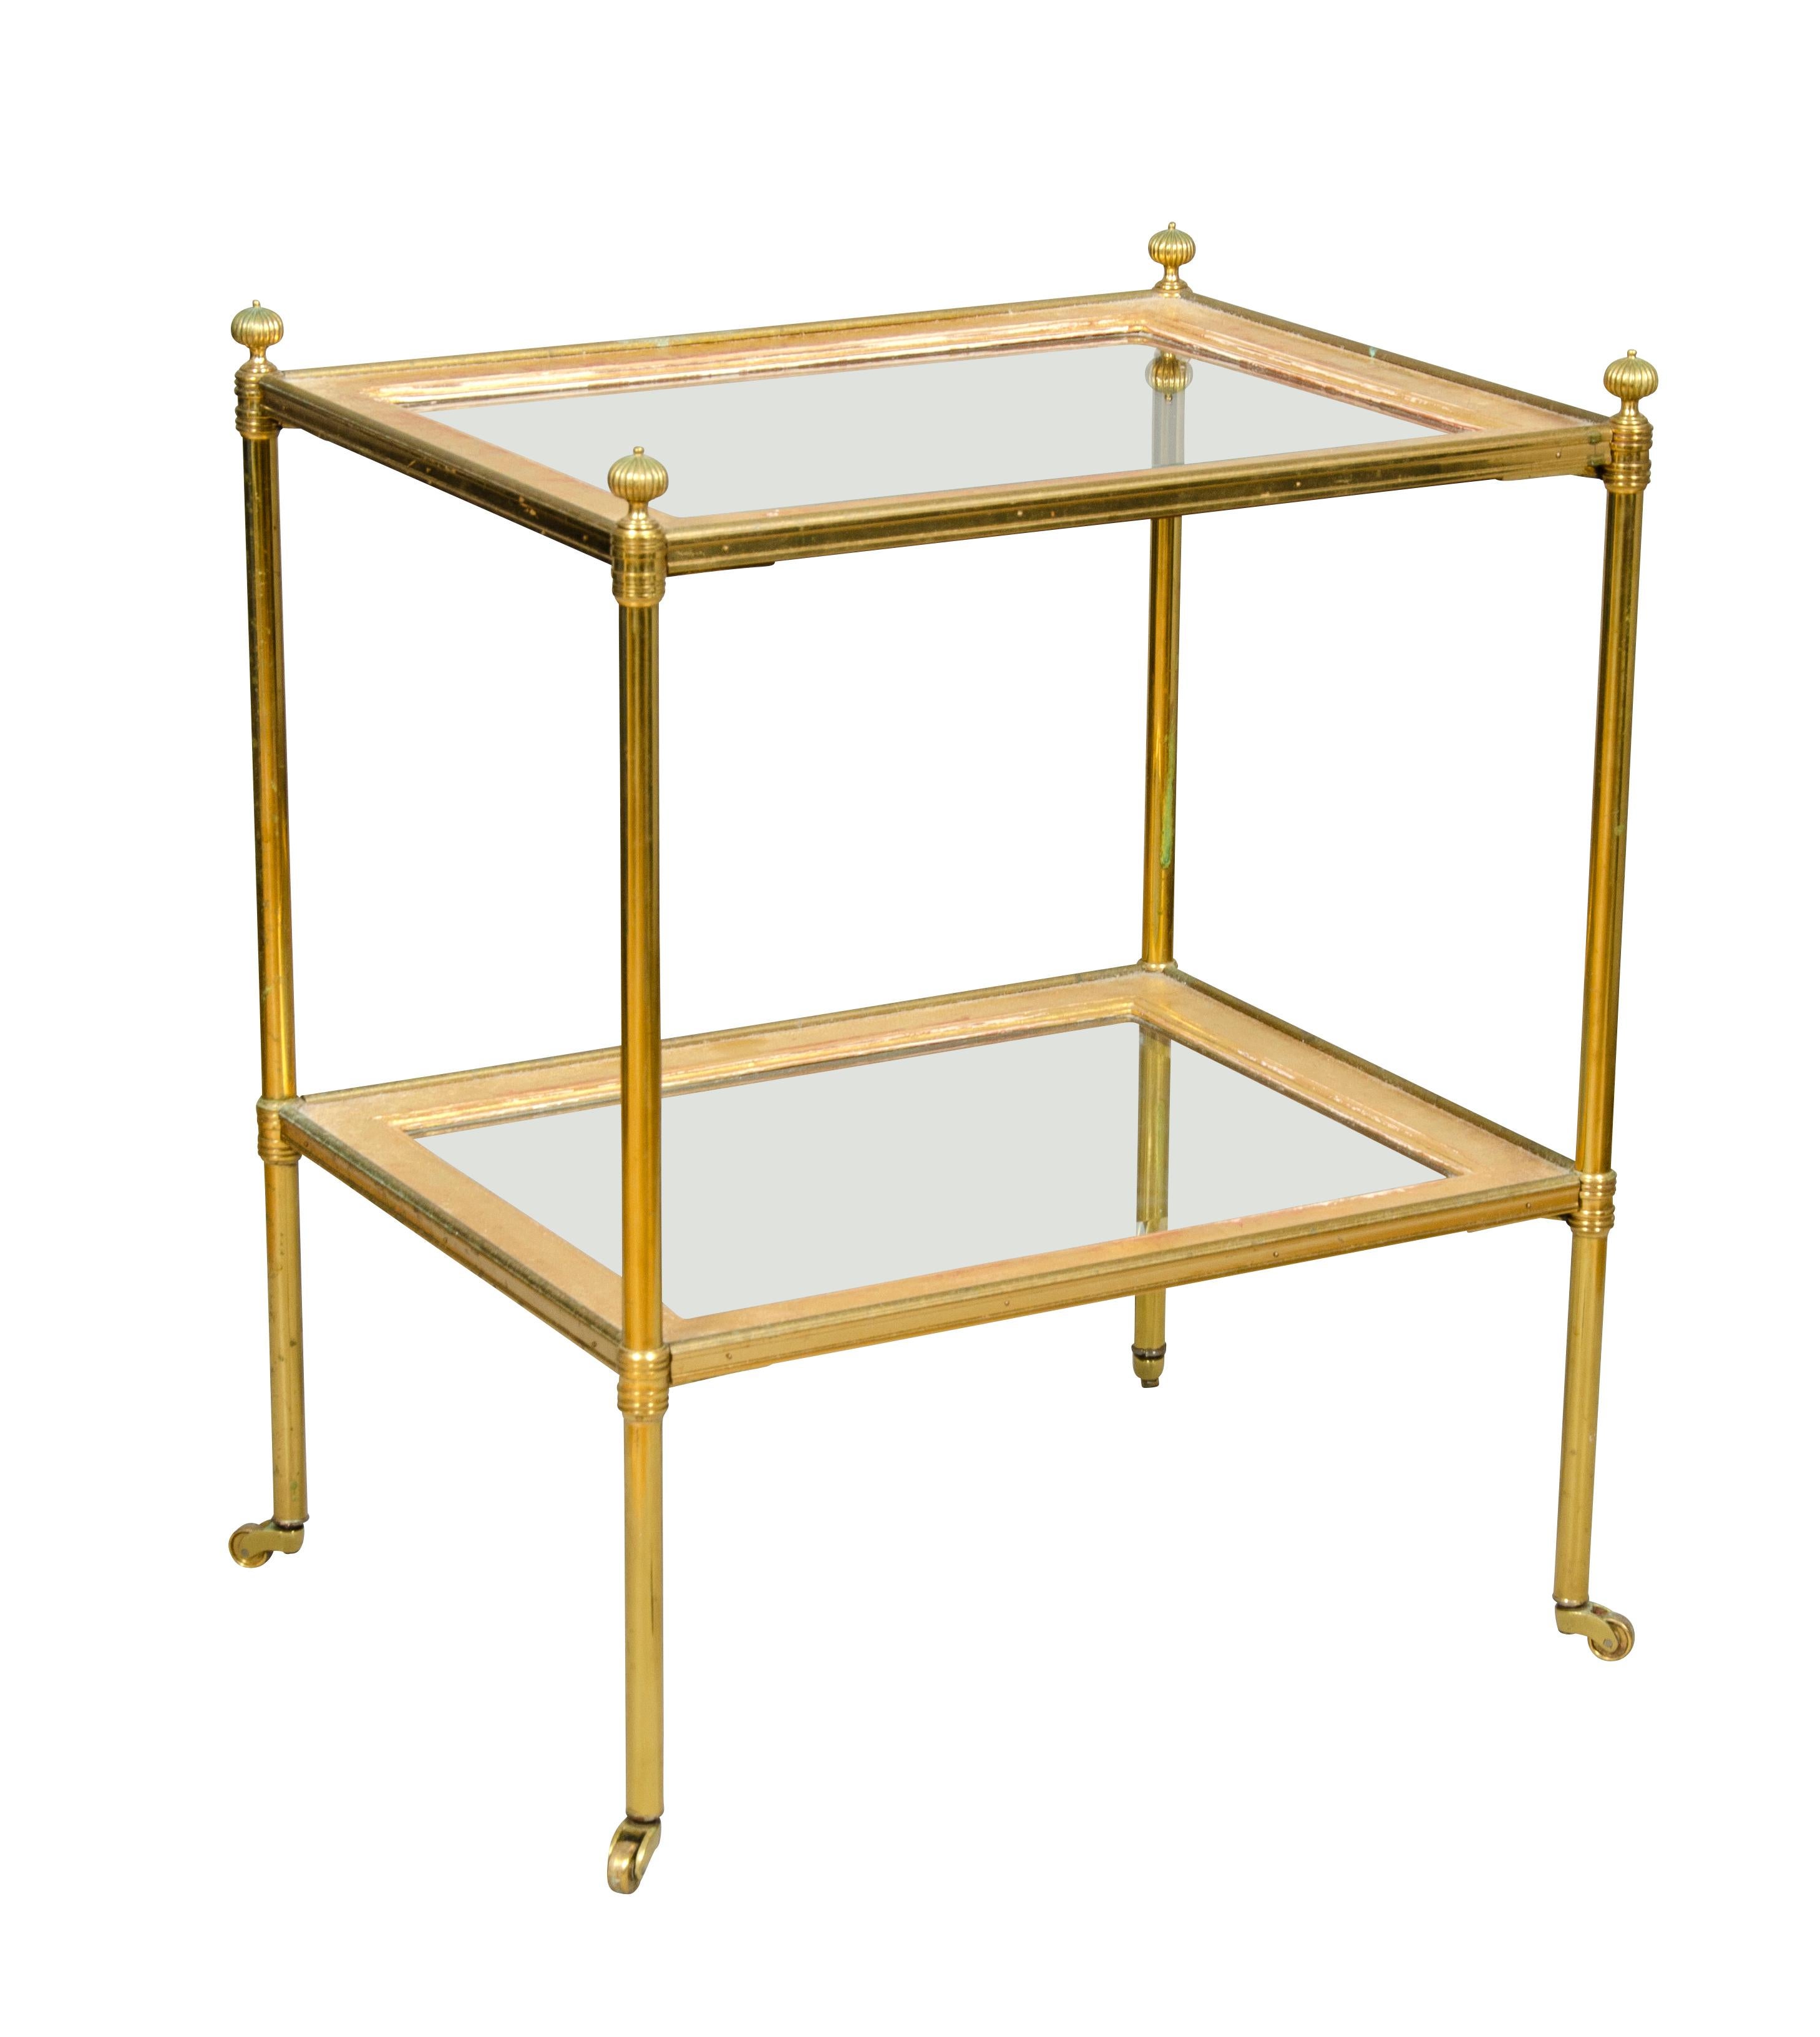 Rectangular with two tiers each with clear glass with gilt gesso border. Circular legs ending on casters.